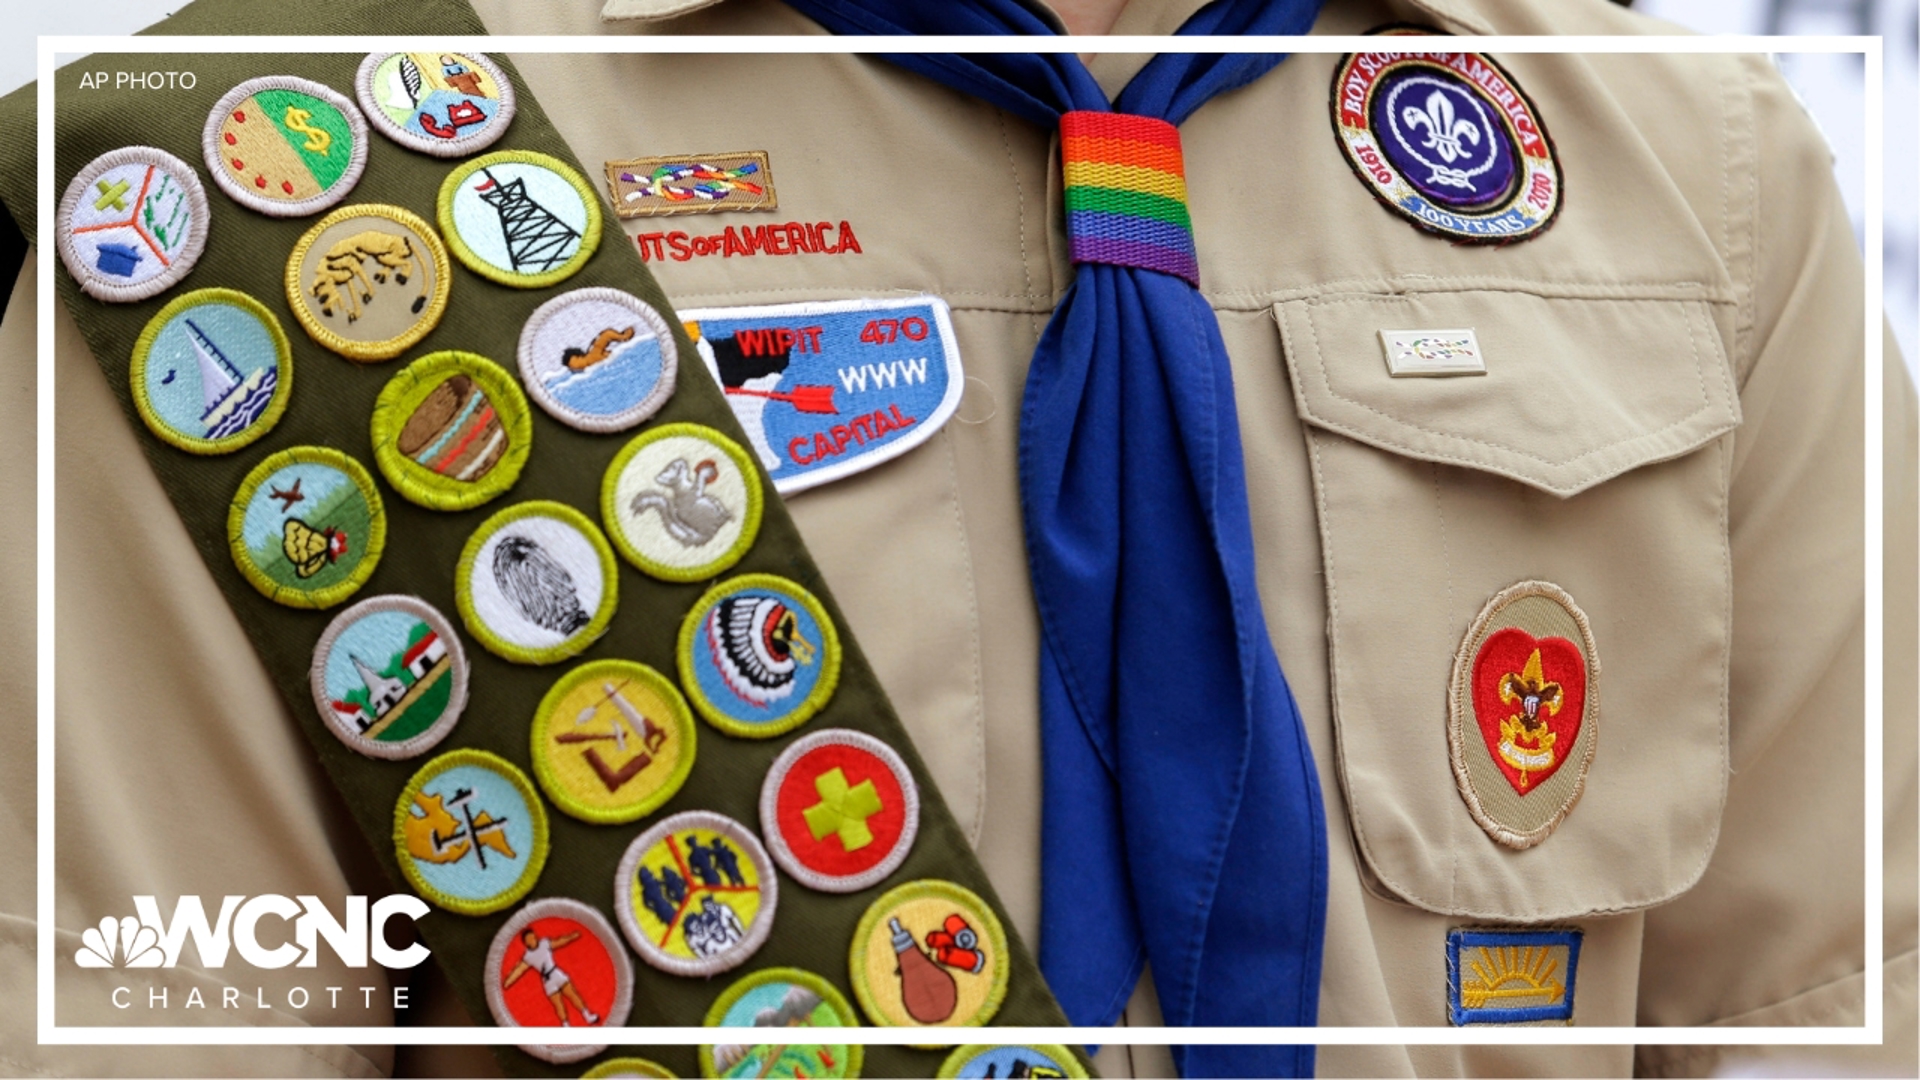 The Boy Scouts of America is changing its name for the first time in its 114-year history and will become Scouting America.